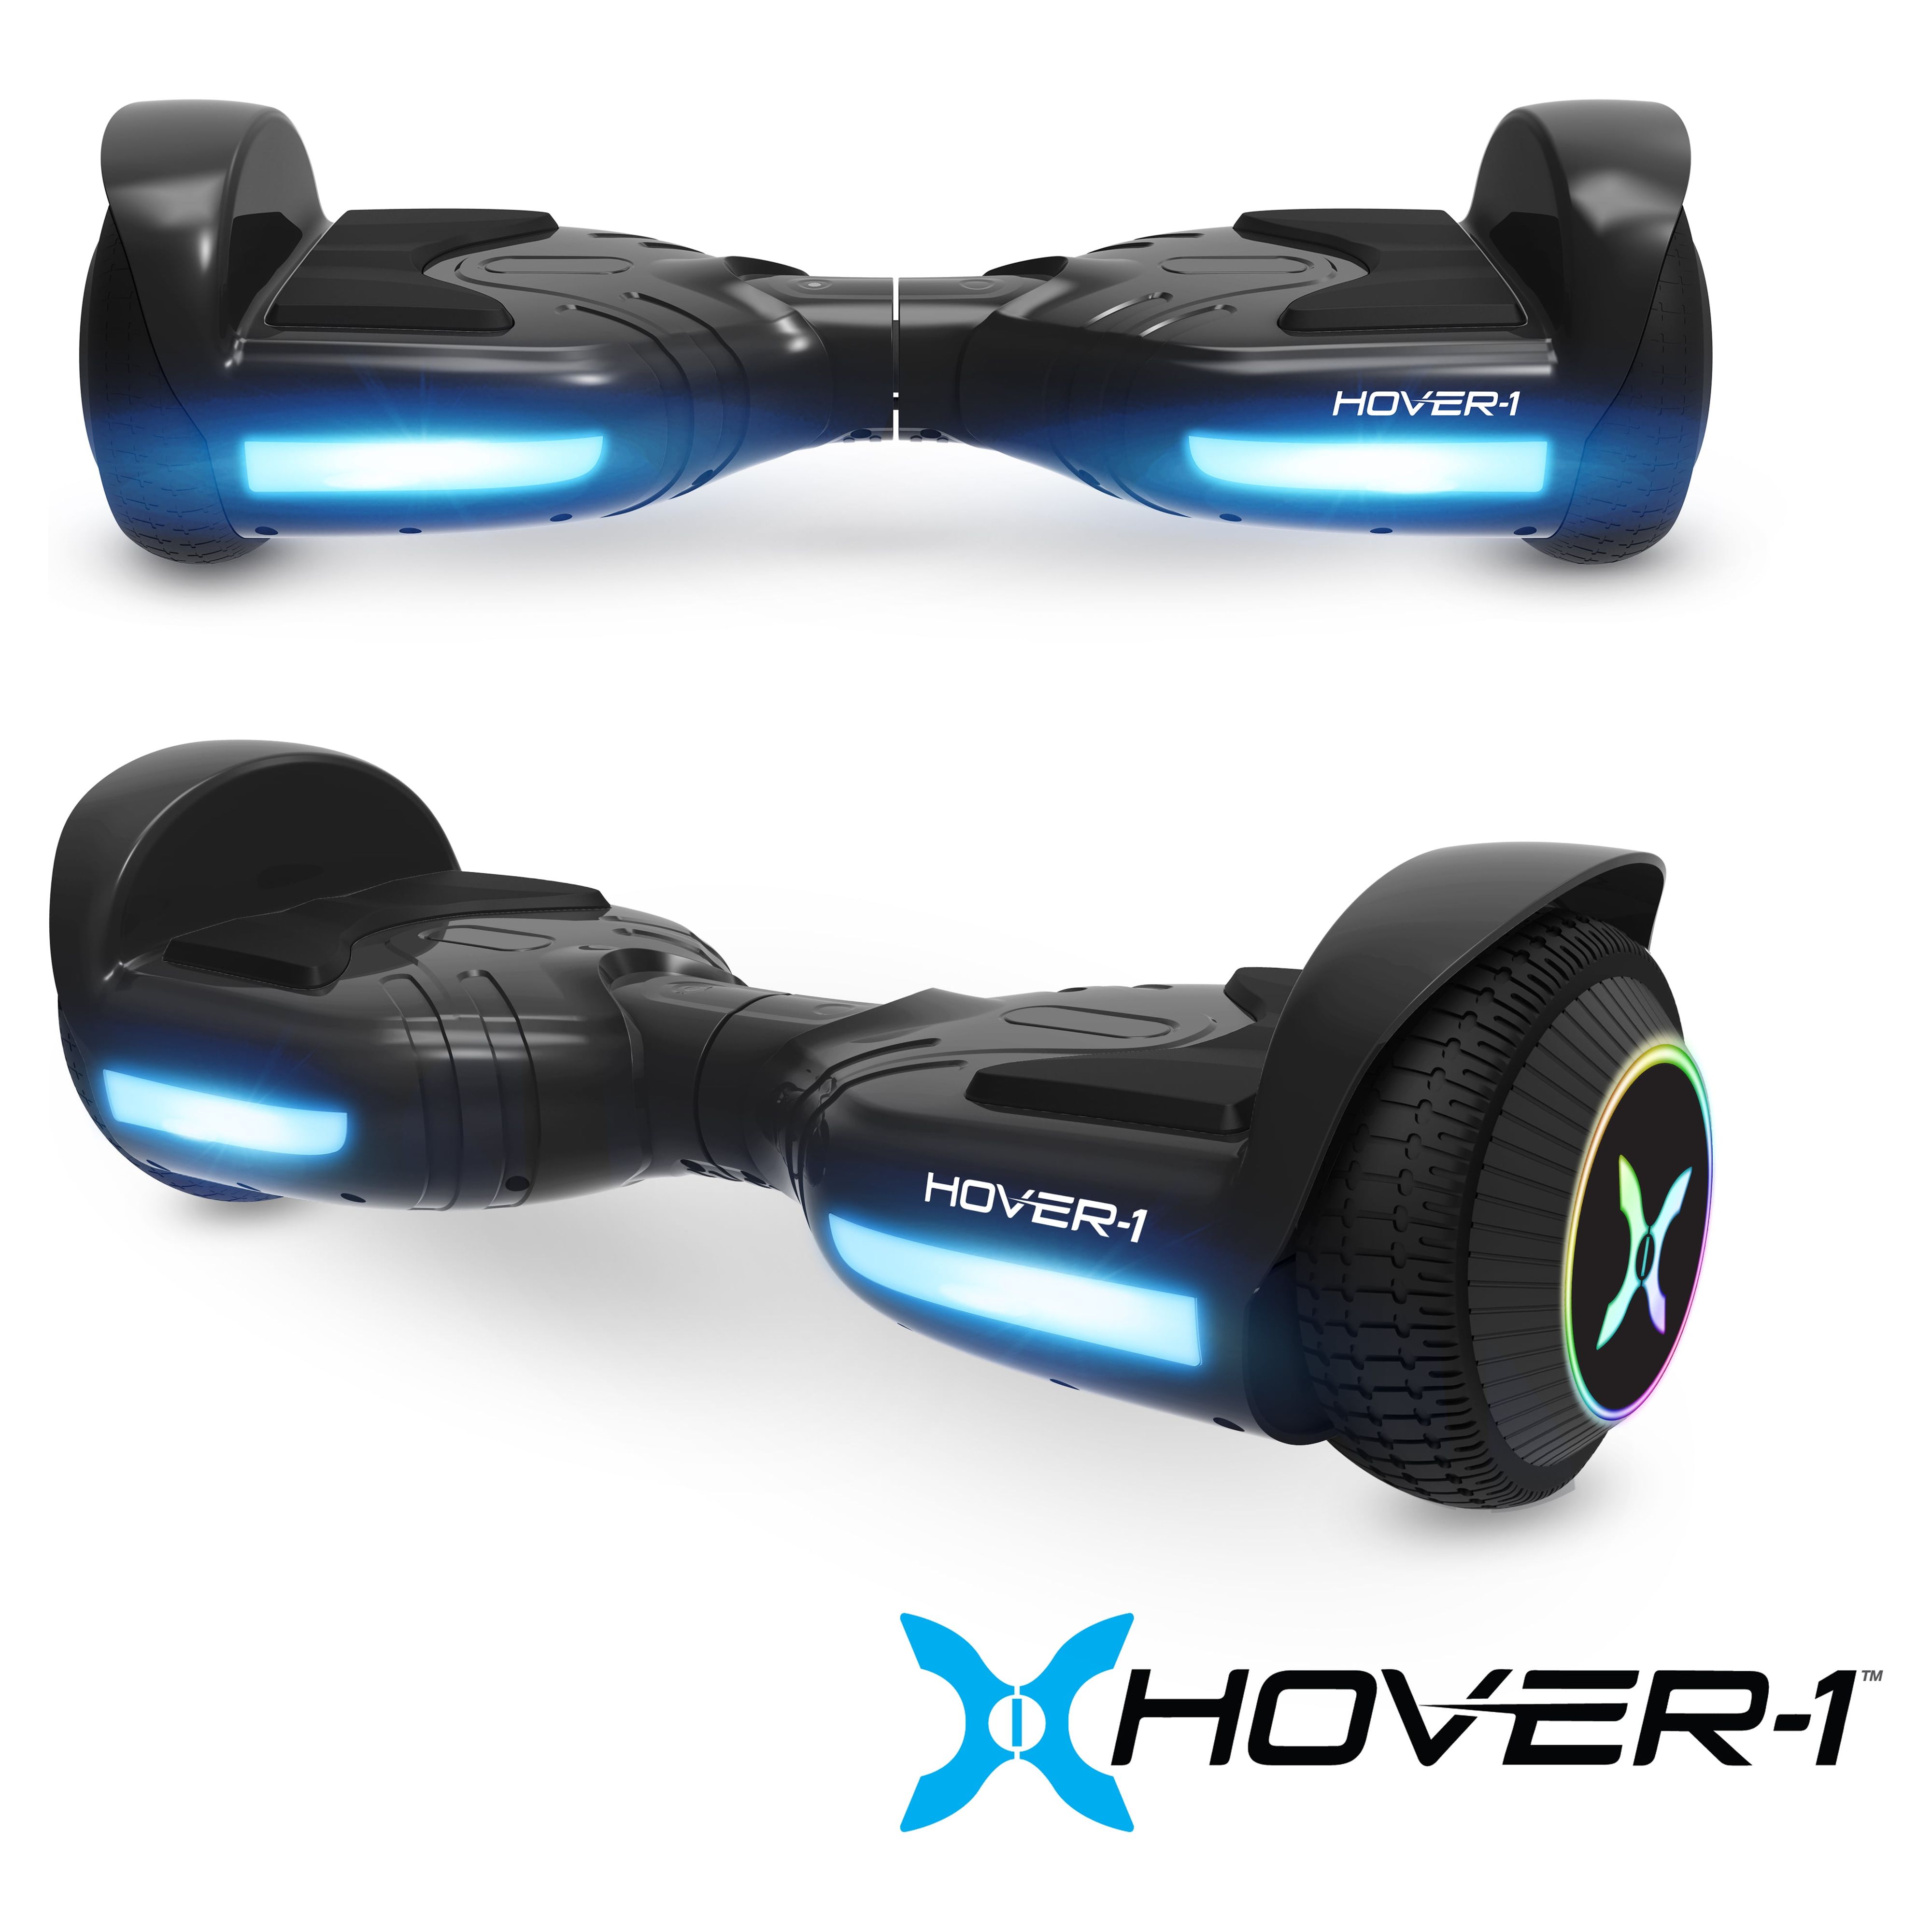 Hover-1 Nova Hoverboard Max Distance 6 Miles - image 3 of 11